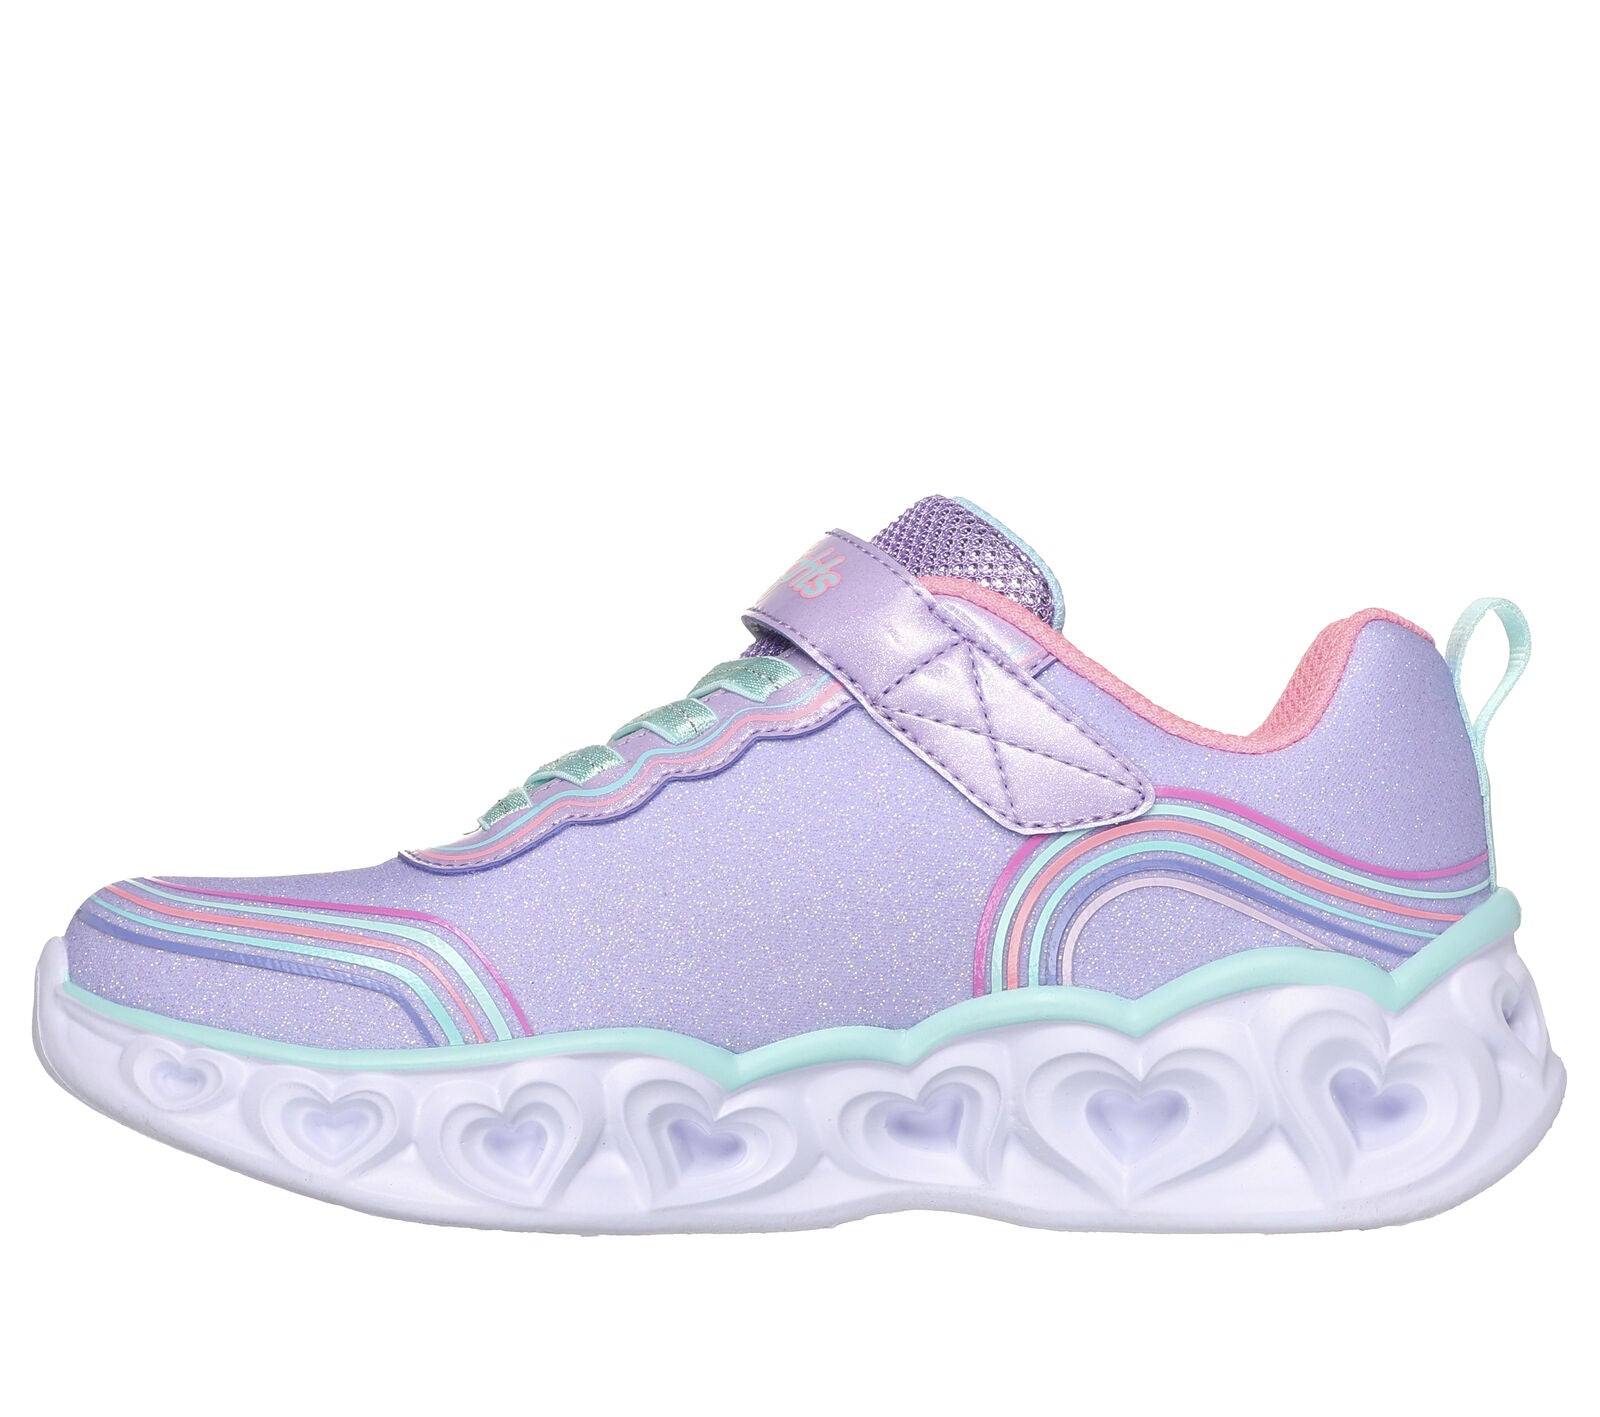 Skechers  S Lights Retro Hearts in lavender with a multi coloured swirl pattern round the upper. Lights along the  heart sole unit and the Skechers branding. Velcro fastening with flat stretch bungee laces. Left side view.